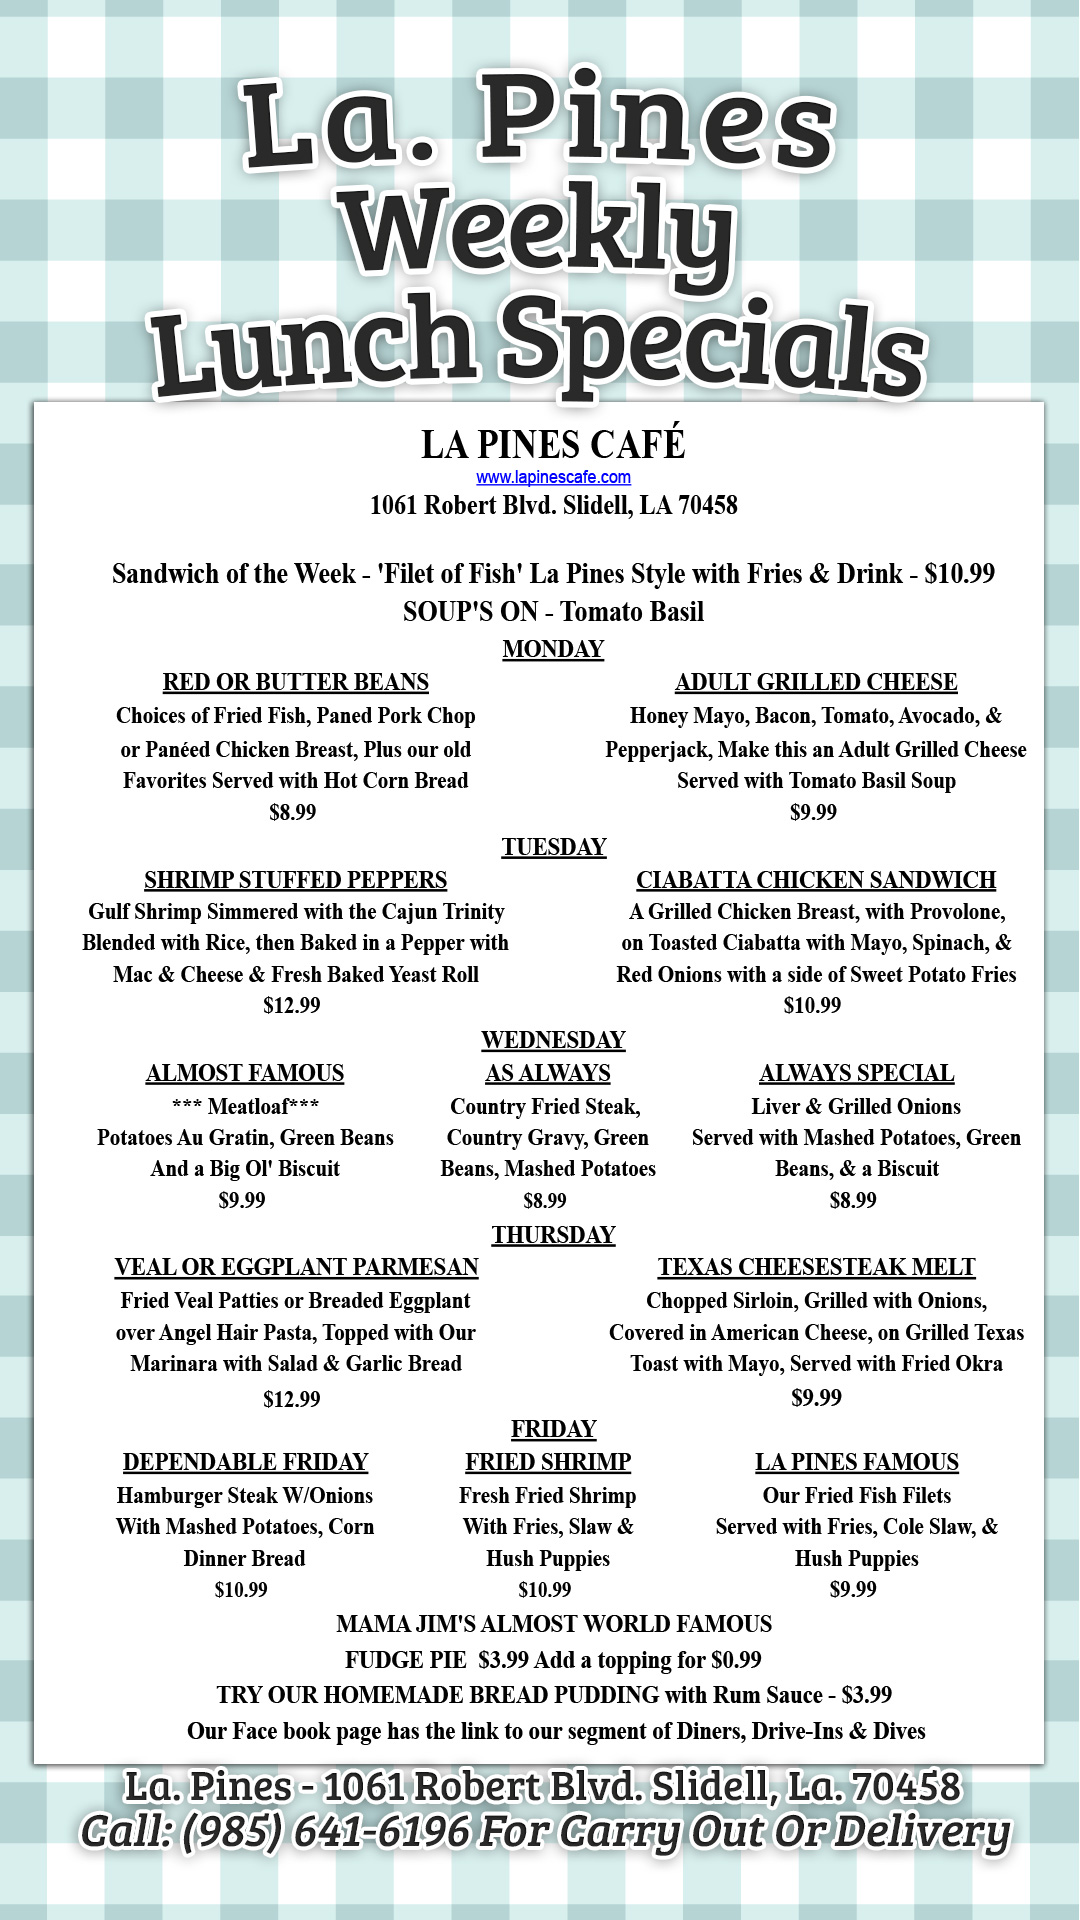 This Week’s Daily Specials Starting Monday, March 27th, 2023.